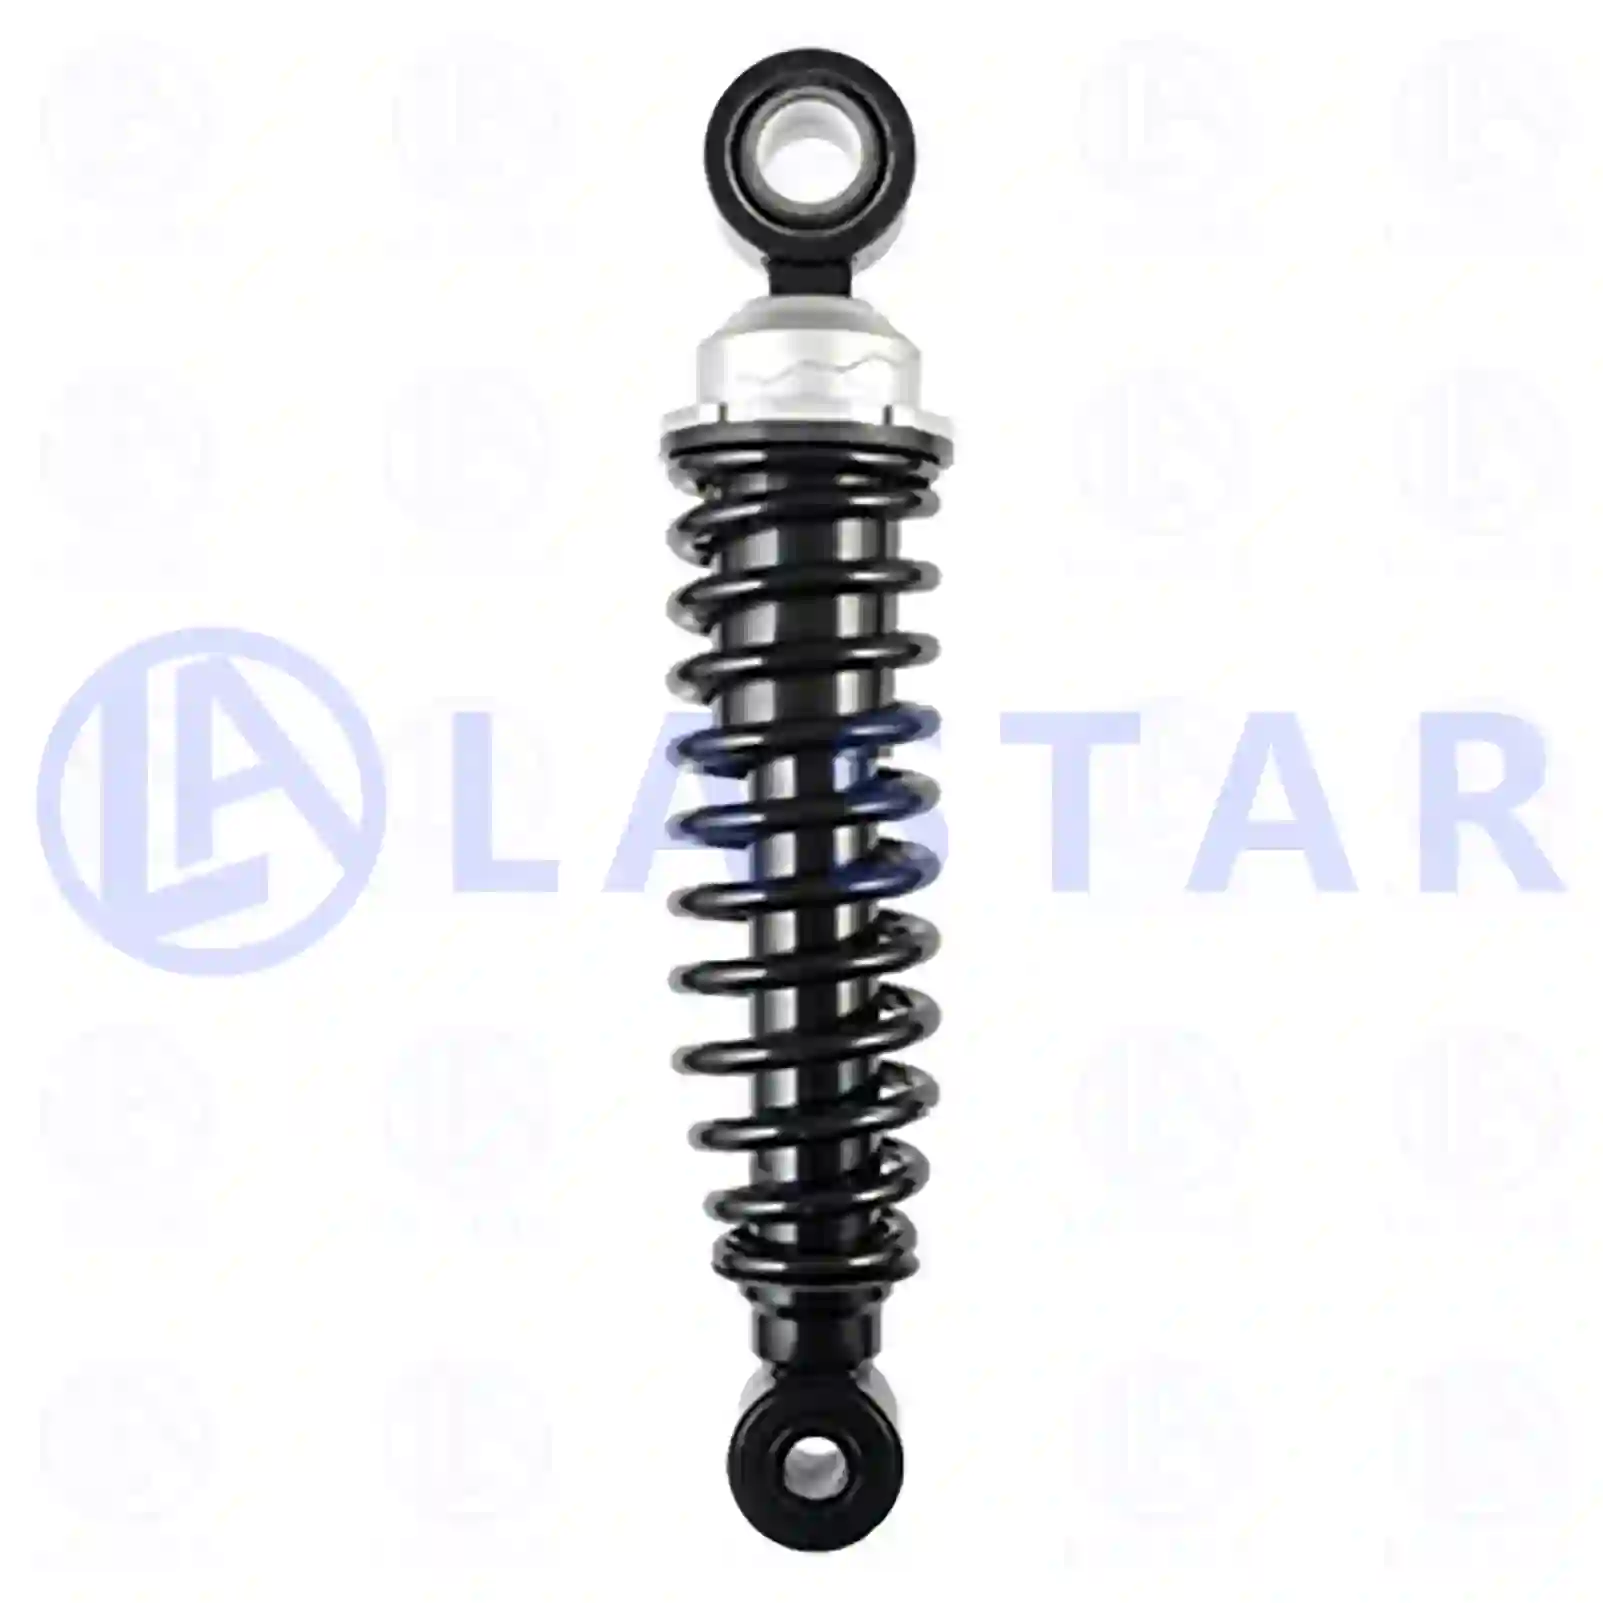 Cabin shock absorber, 77735614, 504080349, 504115 ||  77735614 Lastar Spare Part | Truck Spare Parts, Auotomotive Spare Parts Cabin shock absorber, 77735614, 504080349, 504115 ||  77735614 Lastar Spare Part | Truck Spare Parts, Auotomotive Spare Parts